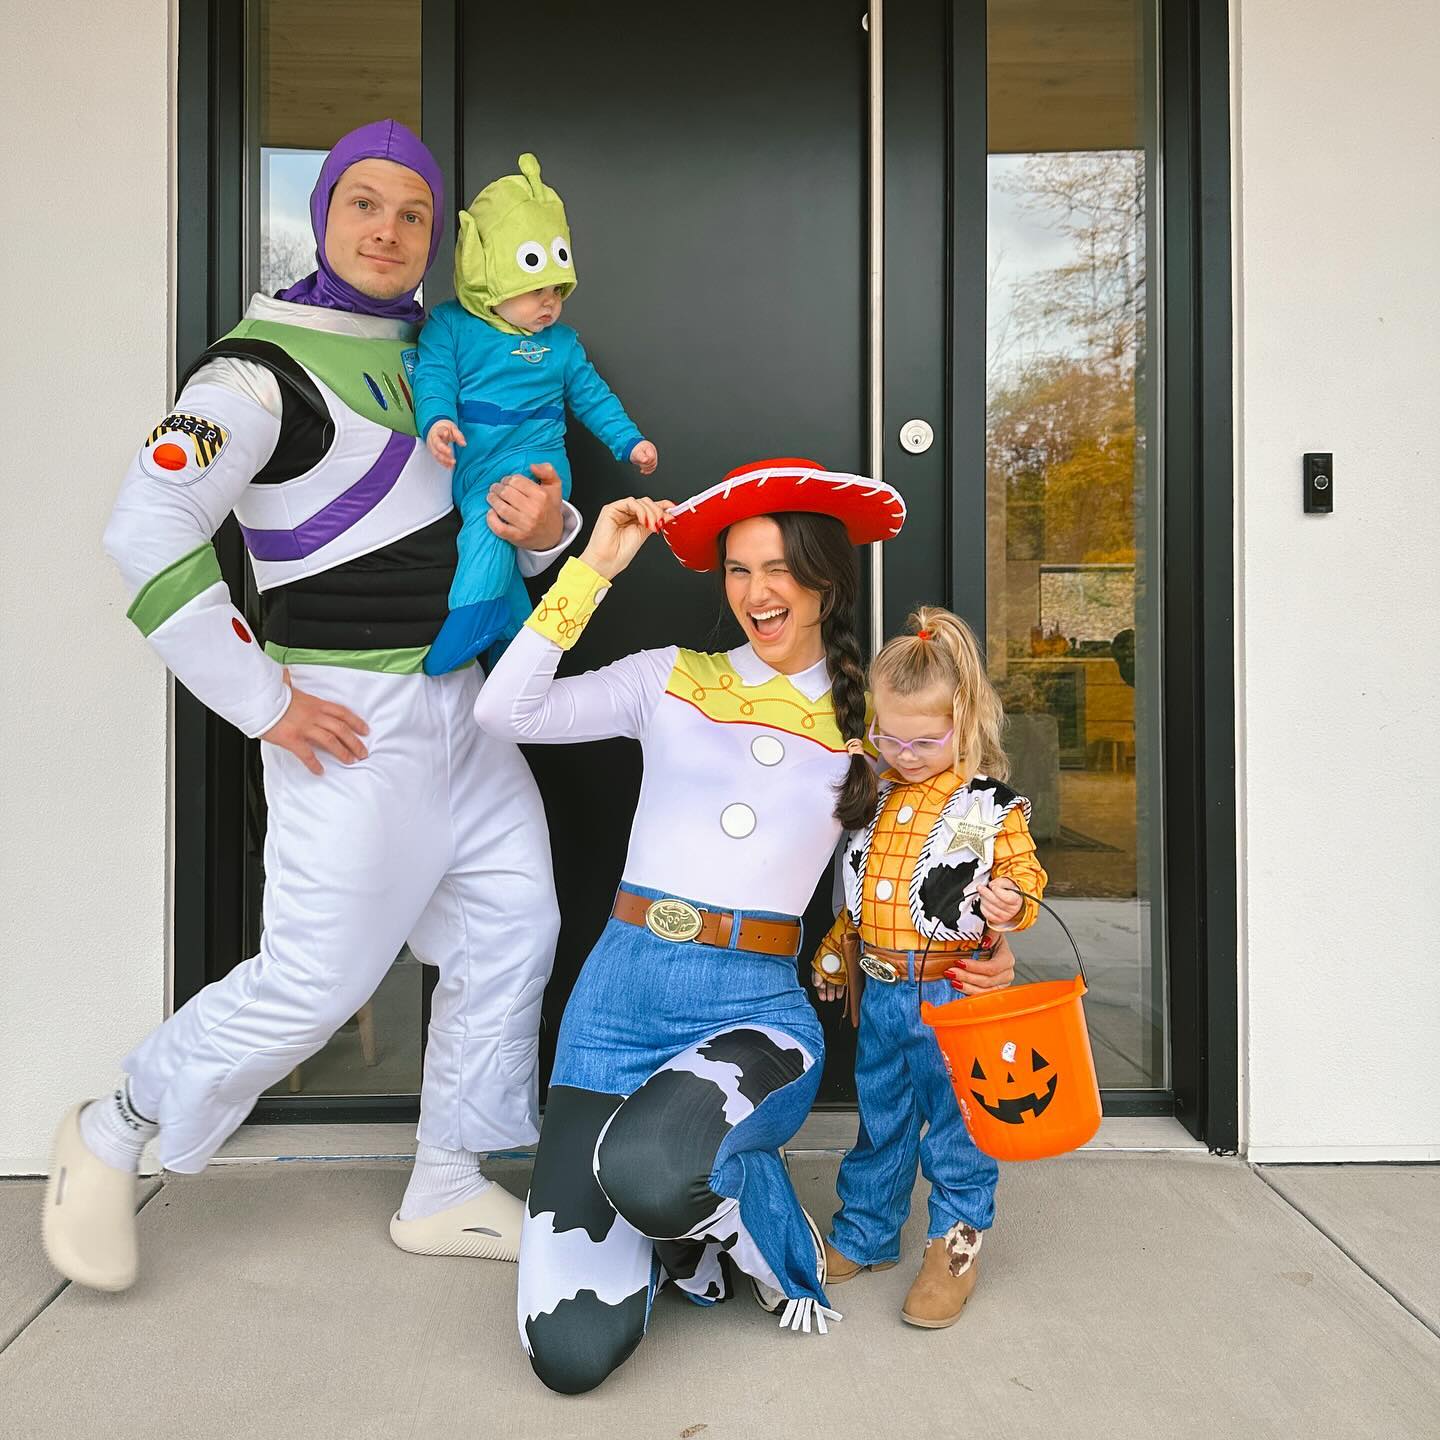 Abbie Herbert poses for a Halloween photo with her husband Josh Herbert, daughter Poppy, and son Jagger